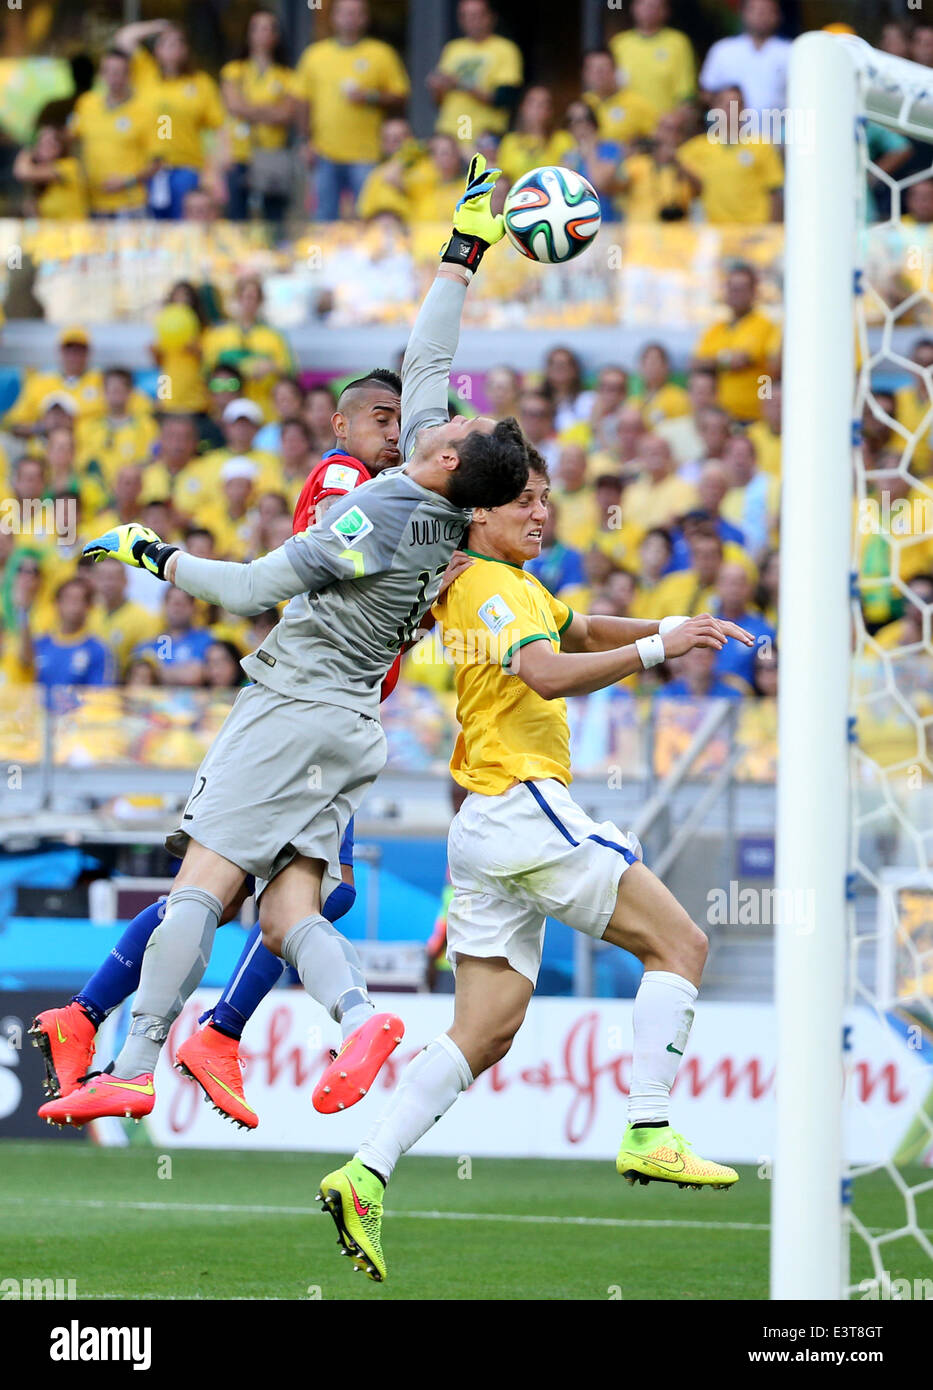 Belo Horizonte, Brazil. 28th June, 2014. Brazil's goalkeeper Julio Cesar vies for the ball during a Round of 16 match between Brazil and Chile of 2014 FIFA World Cup at the Estadio Mineirao Stadium in Belo Horizonte, Brazil, on June 28, 2014. Credit:  Li Ming/Xinhua/Alamy Live News Stock Photo